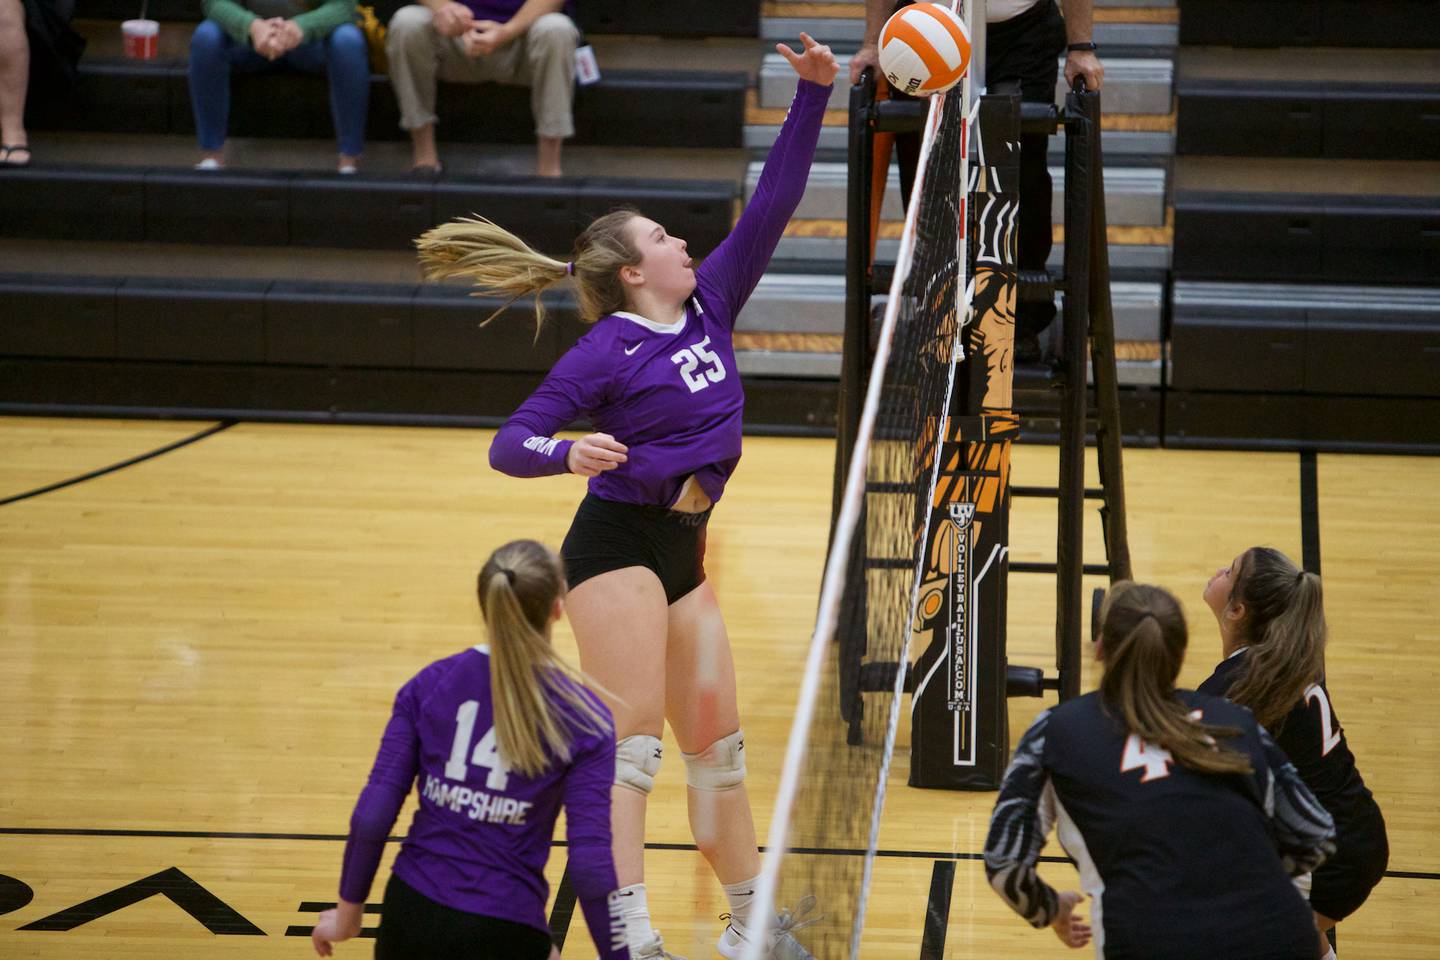 Hampshire's Emilia Frankiewicz  with the kill shoot against McHenry on Tuesday, Sept. 6,2022 in McHenry.